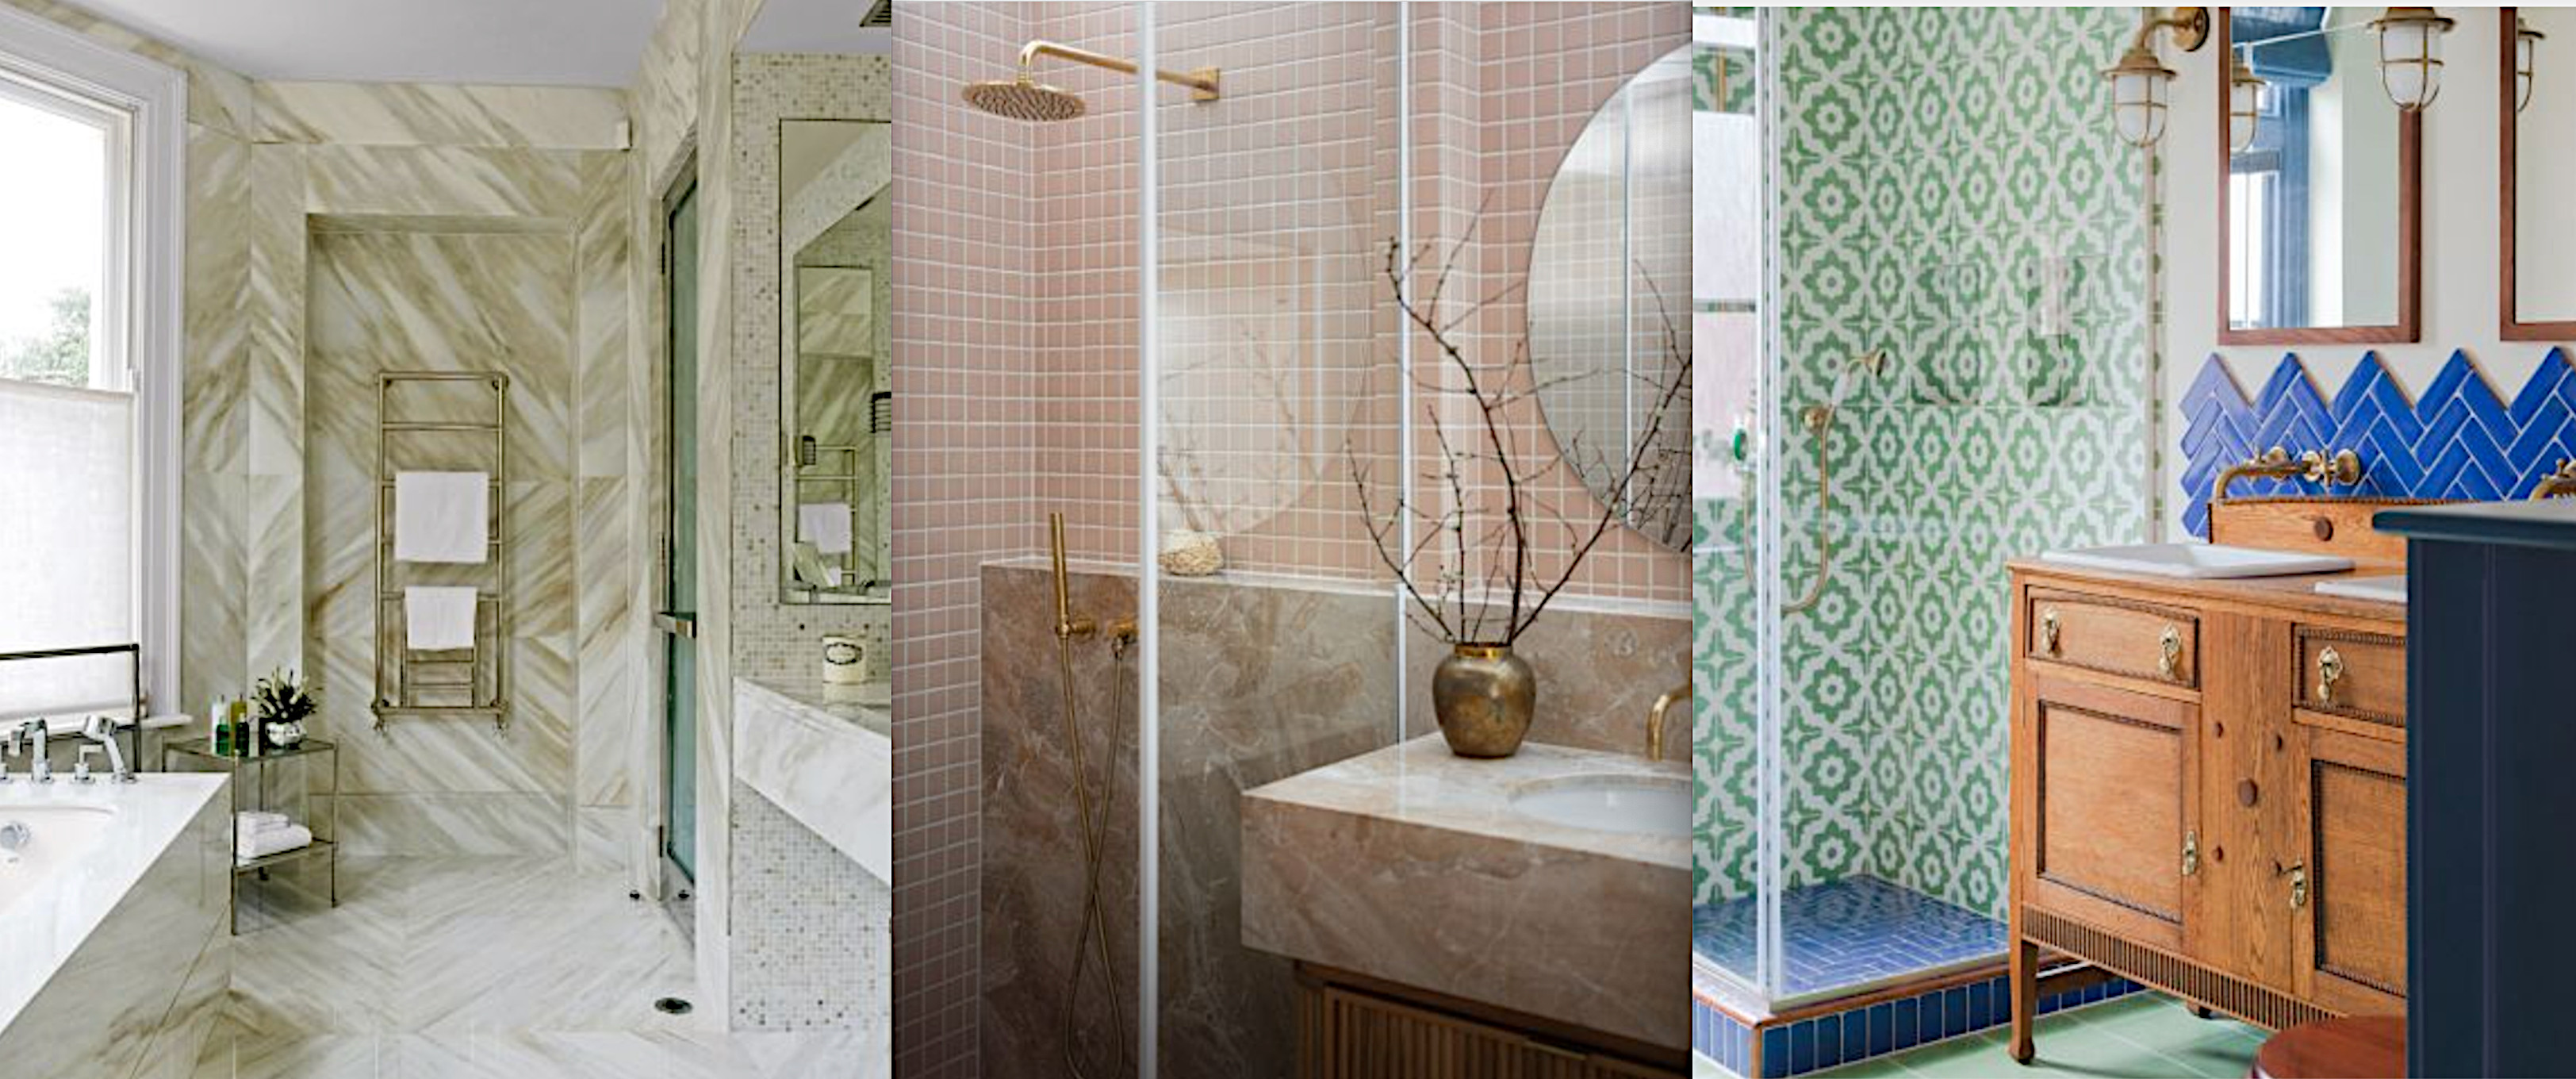 Small bathroom tile ideas – 20 stunning small-space designs